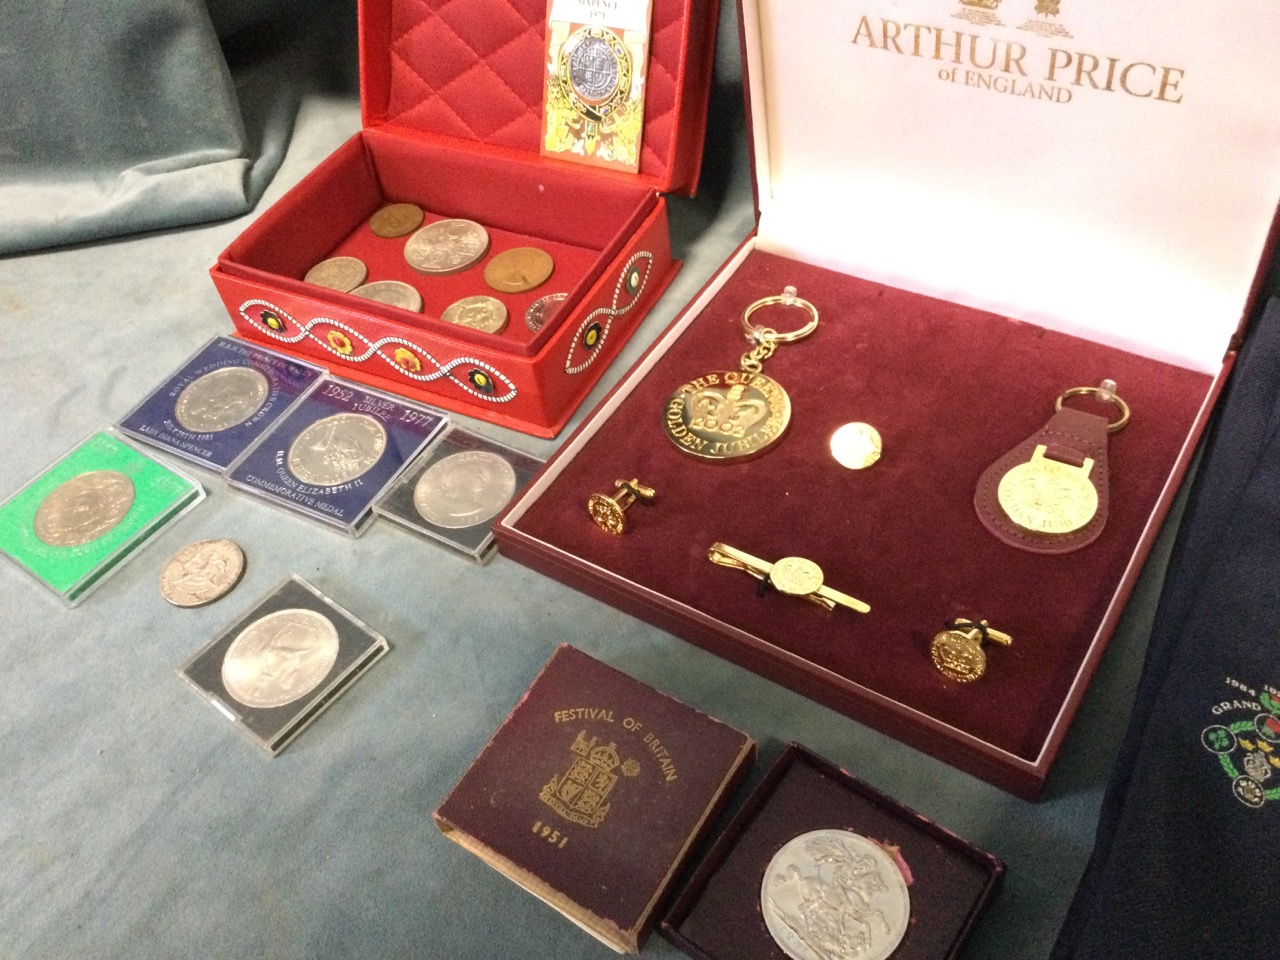 Miscellaneous commemorative items including a 72 Olympics plate & cigarette box, crowns and other - Image 3 of 3